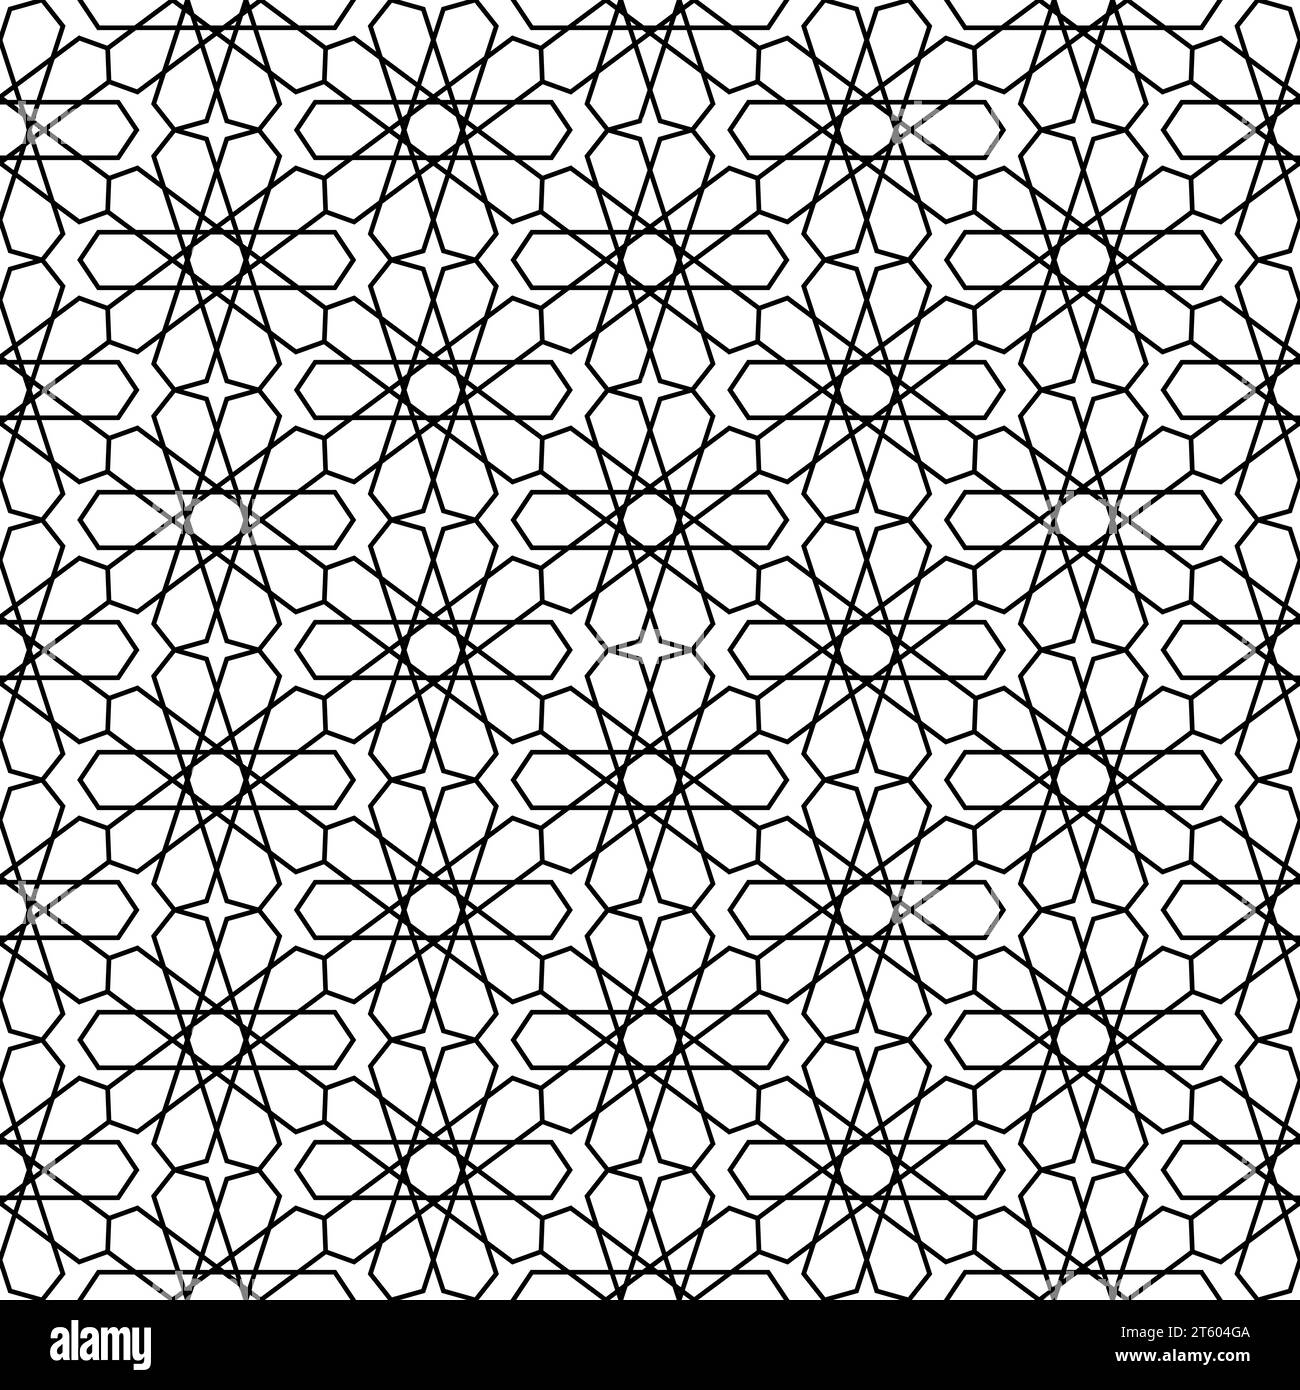 Morocco seamless pattern. Repeating black marocco grid isolated on white background. Repeated simple moroccan mosaic motive. Islamic textur for design Stock Vector